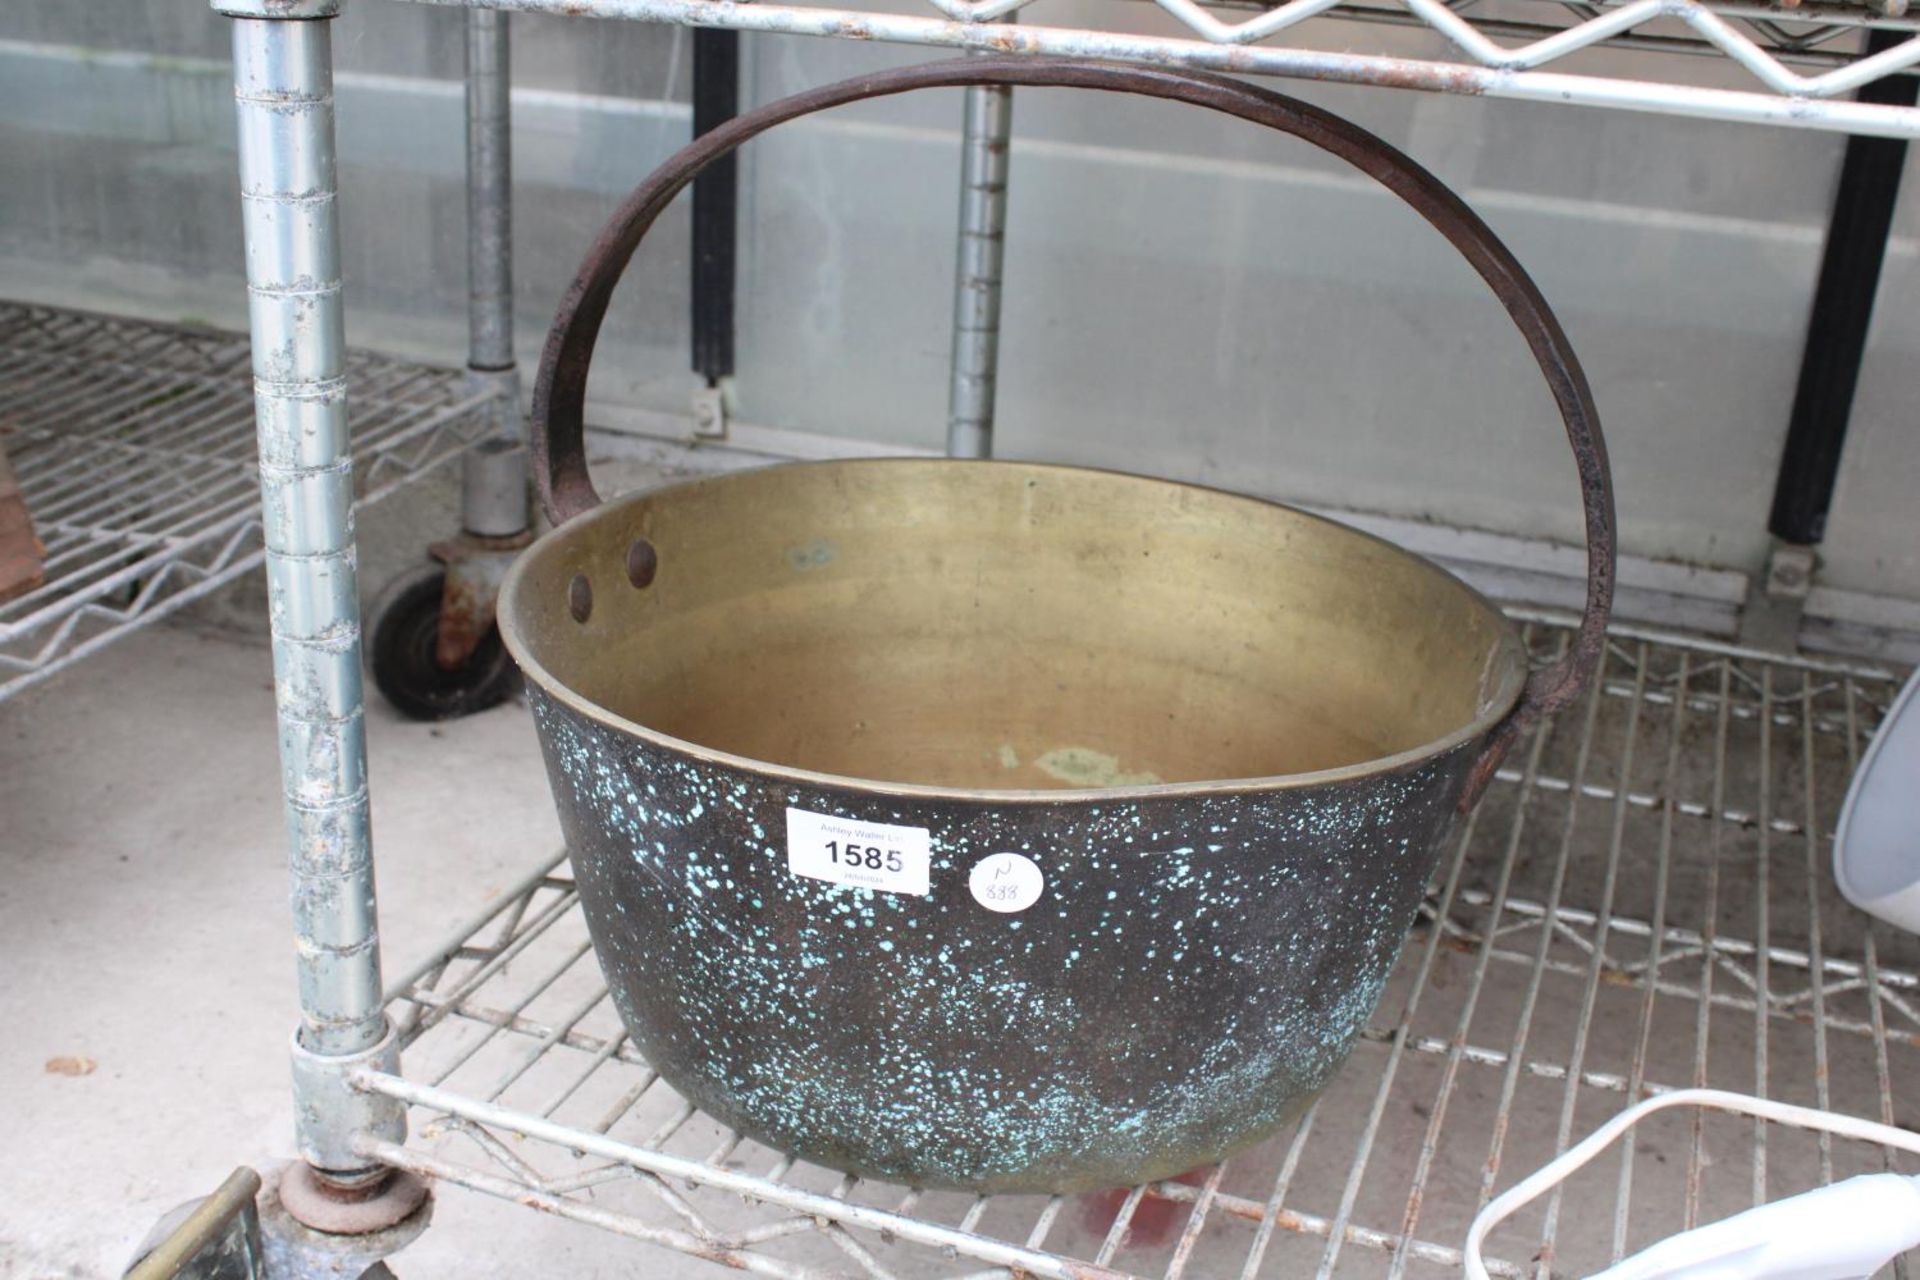 A VINTAGE BRASS JAM PAN WITH STEEL HANDLE